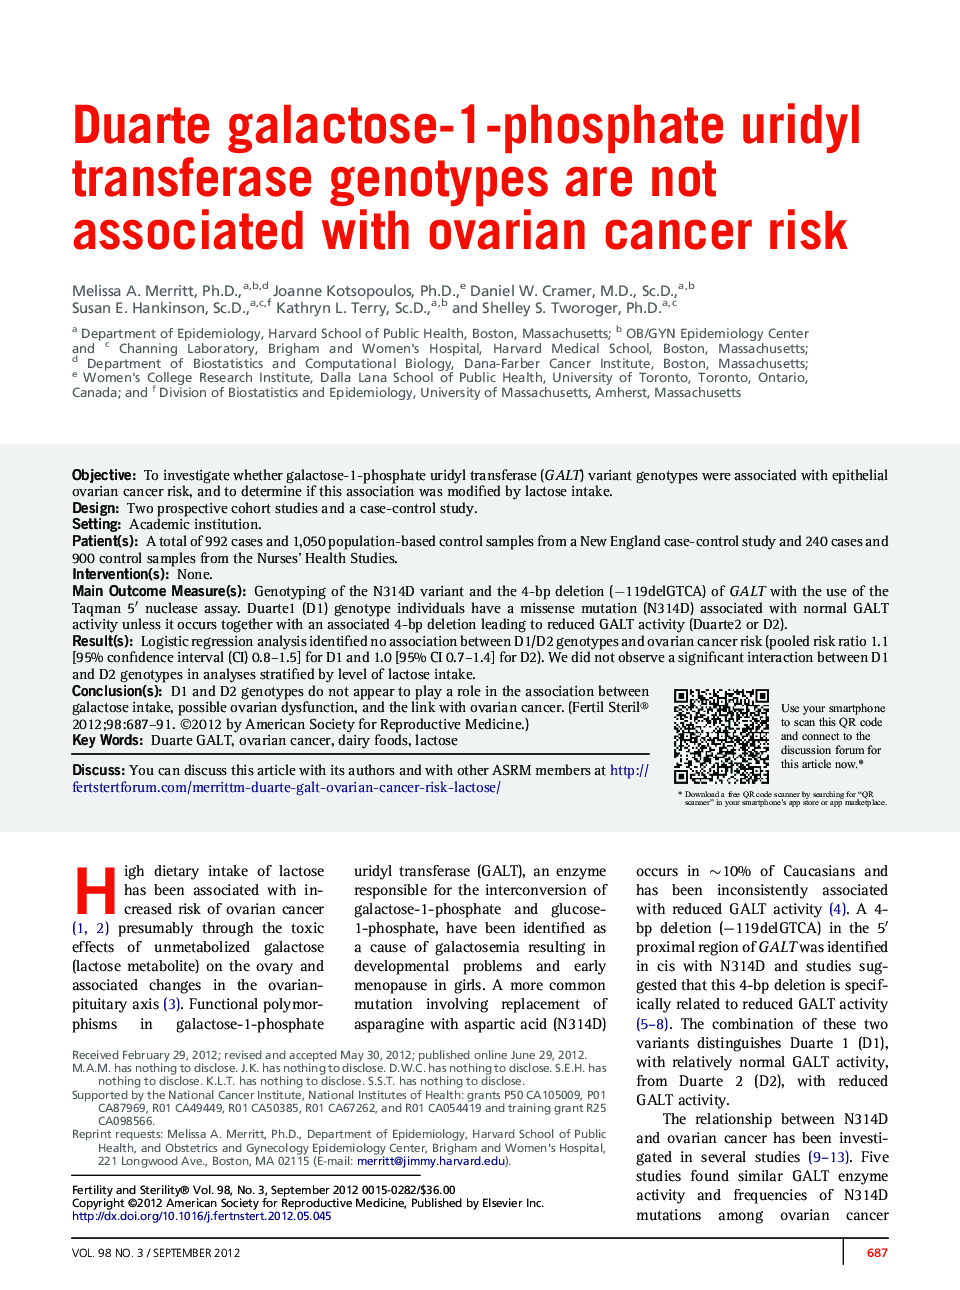 Duarte galactose-1-phosphate uridyl transferase genotypes are not associated with ovarian cancer risk